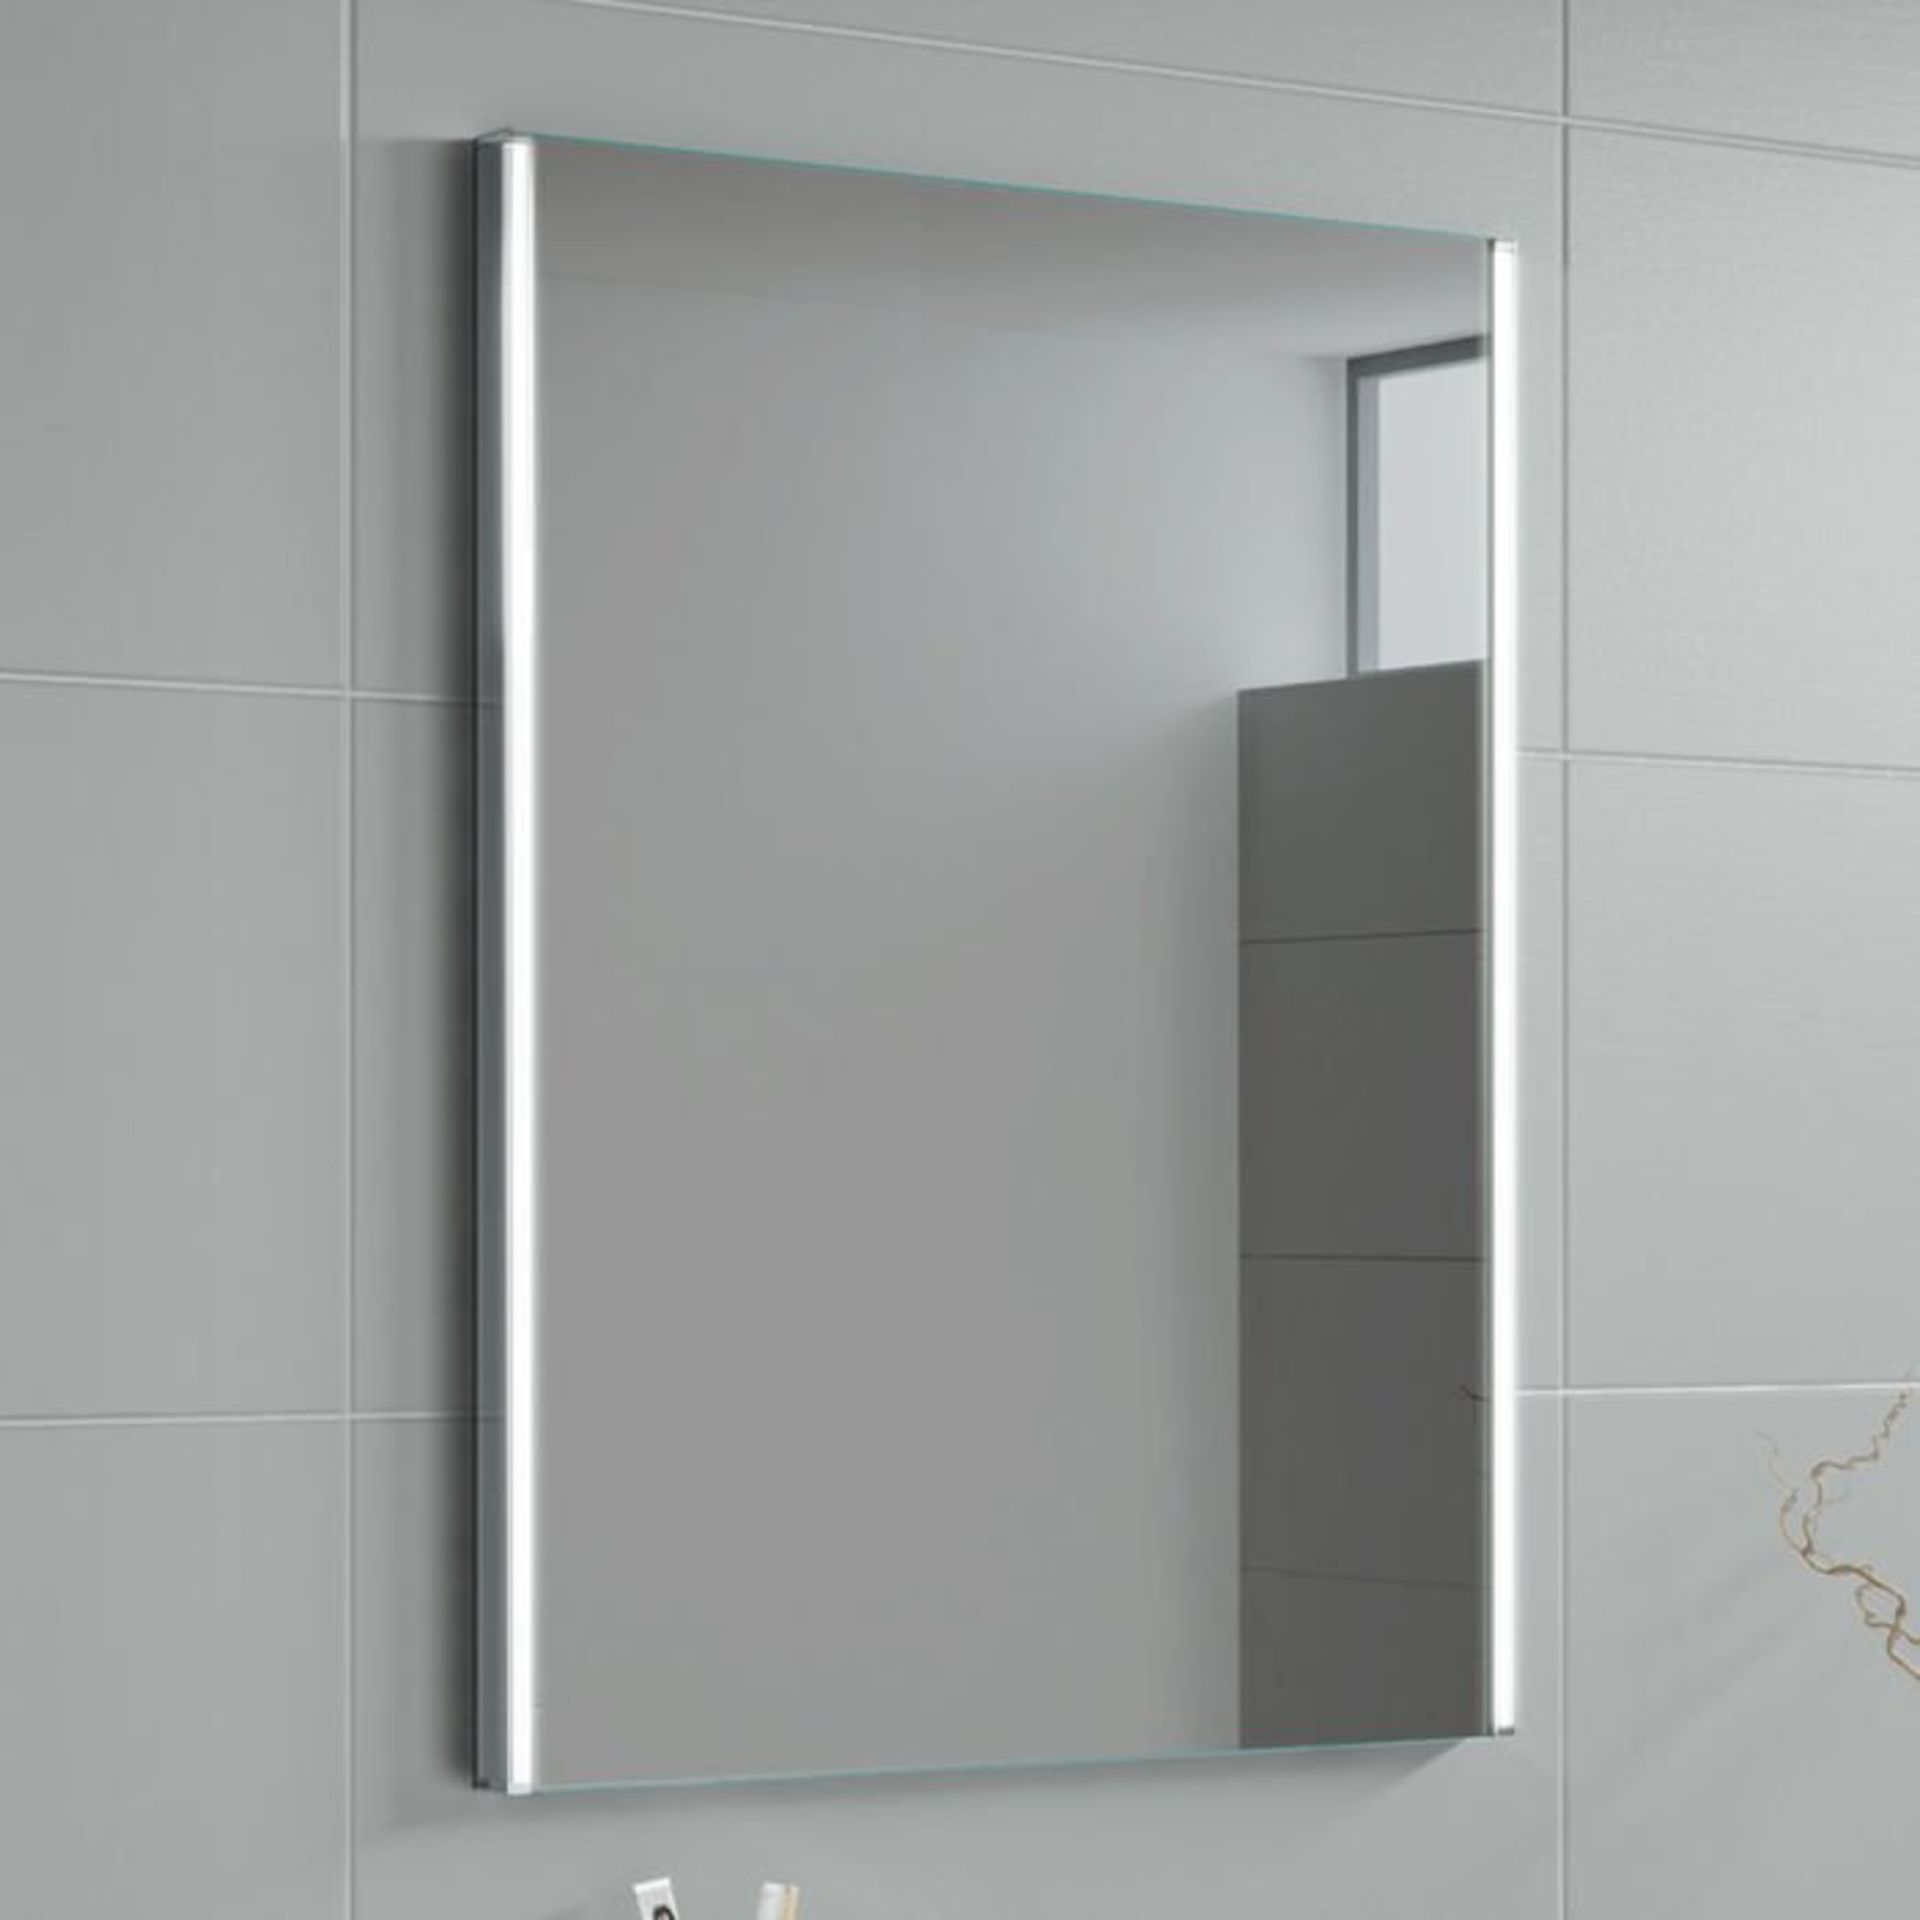 (H209)500x700mm Lunar LED Mirror - Battery Operated. Energy saving controlled On / Off switch - Image 3 of 5